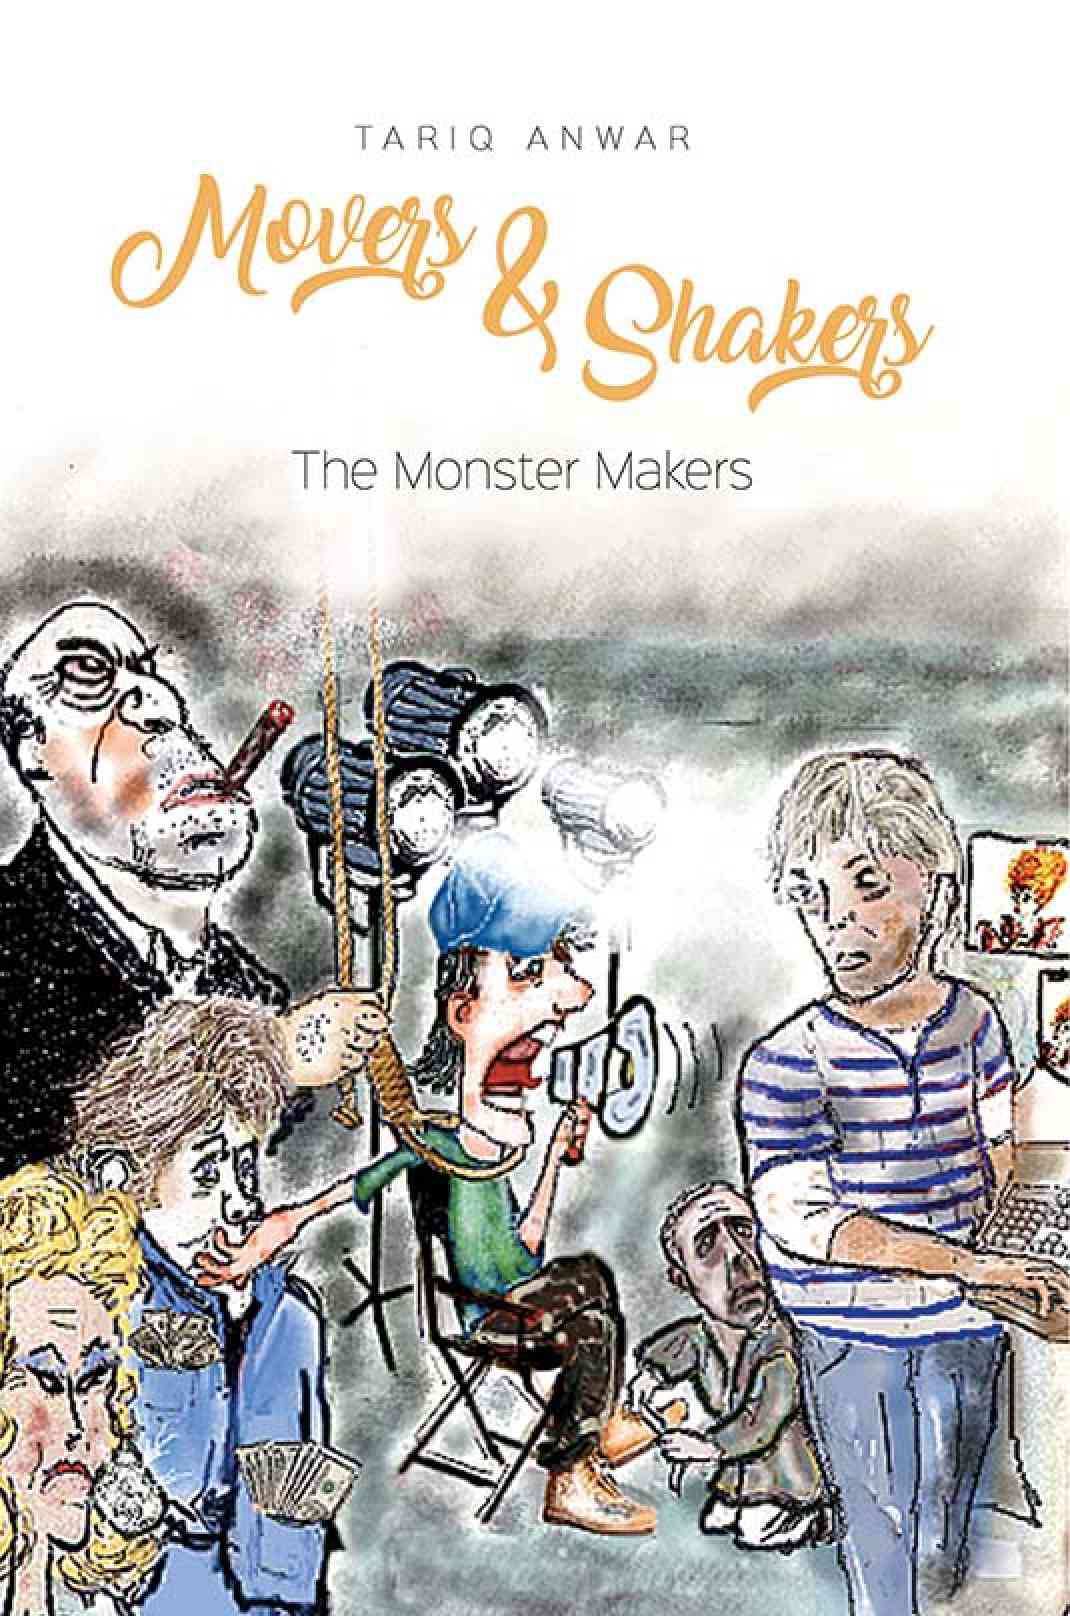 Movers and Shakers, The Monster Makers by Tariq Anwar Featured by Cinemontage